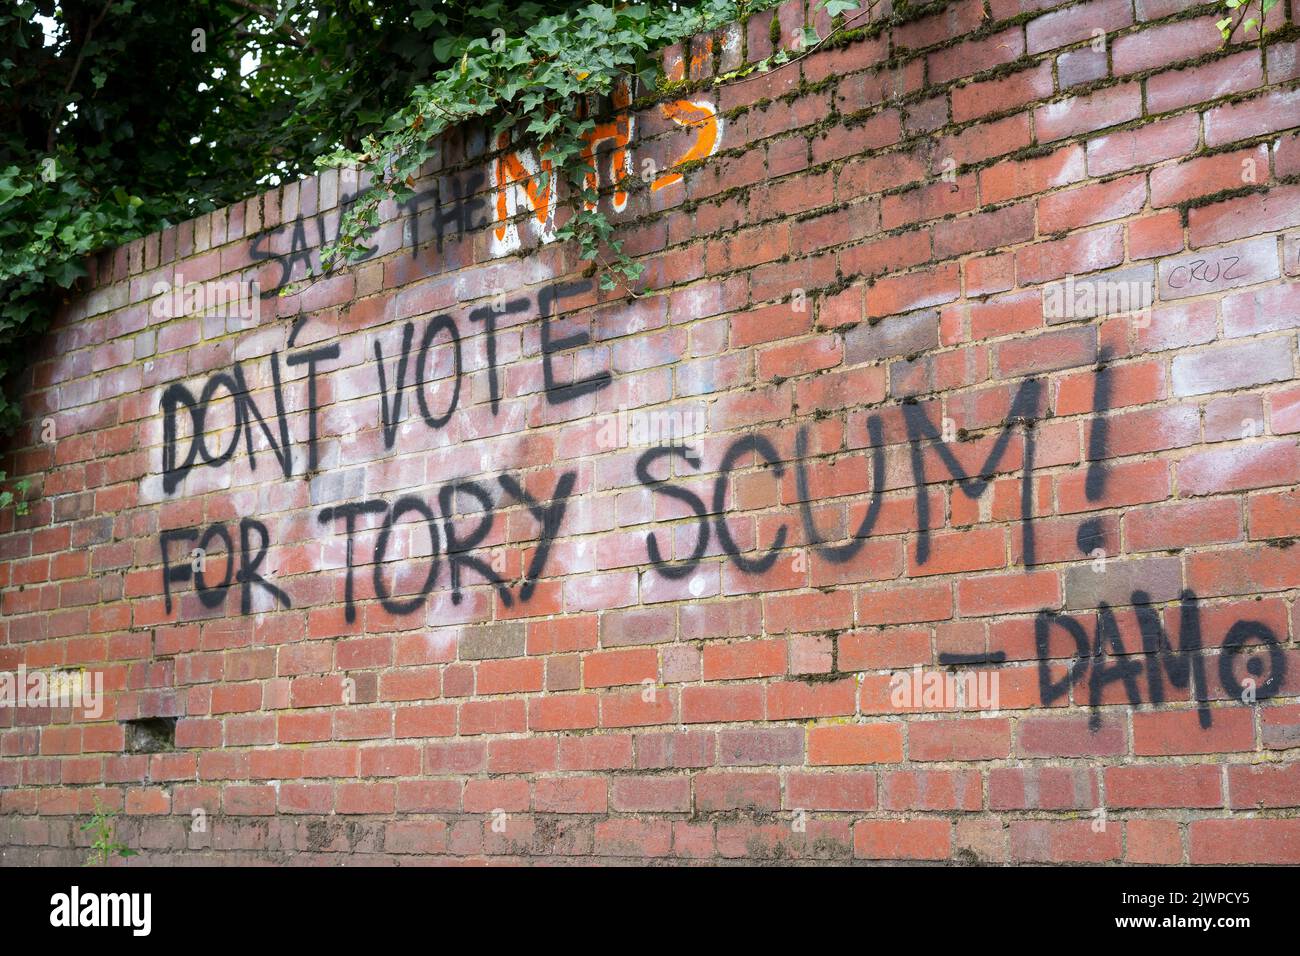 Graffiti words written on an outdoor UK brick wall: 'Save the NHS & Don't Vote for Tory Scum!' Anti-conservative opinion. Stock Photo